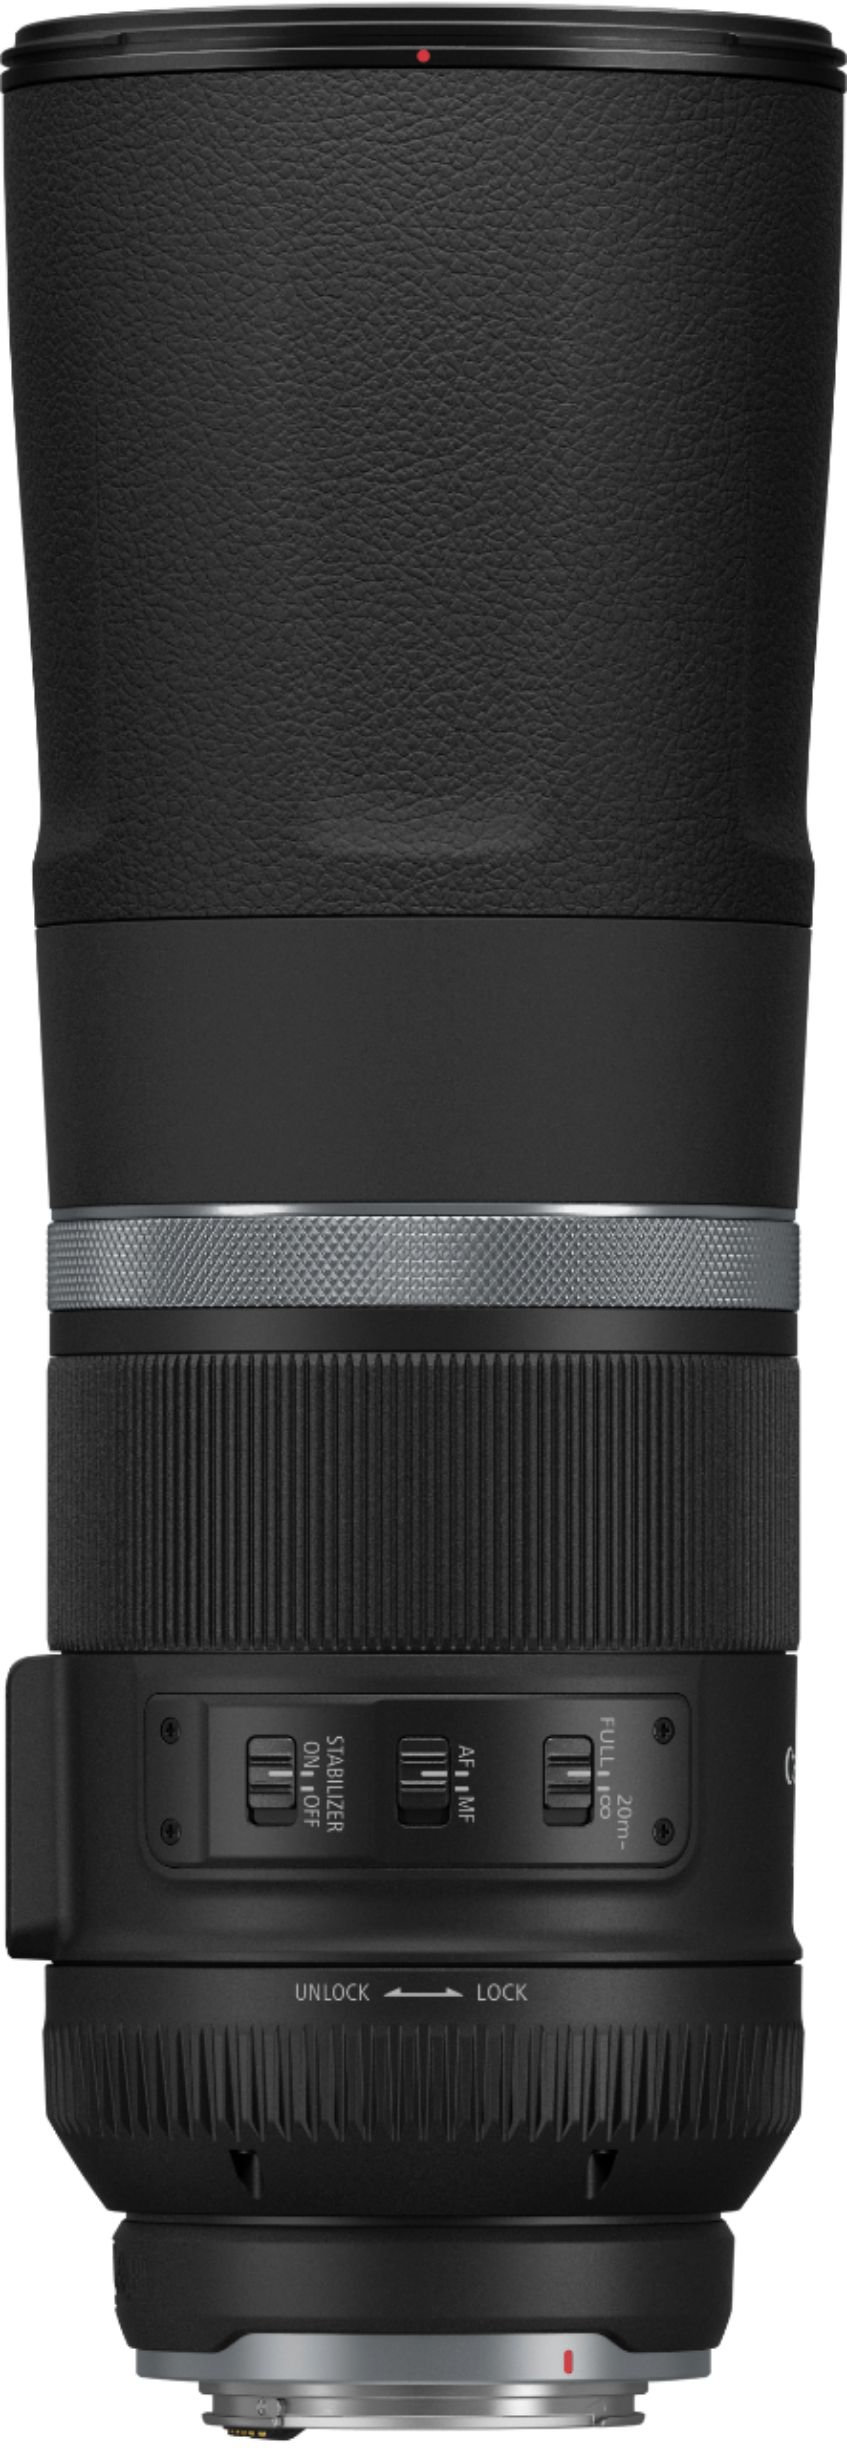 Back View: Canon - RF800mm F11  IS STM Telephoto Lens for EOS R-Series Cameras - Black